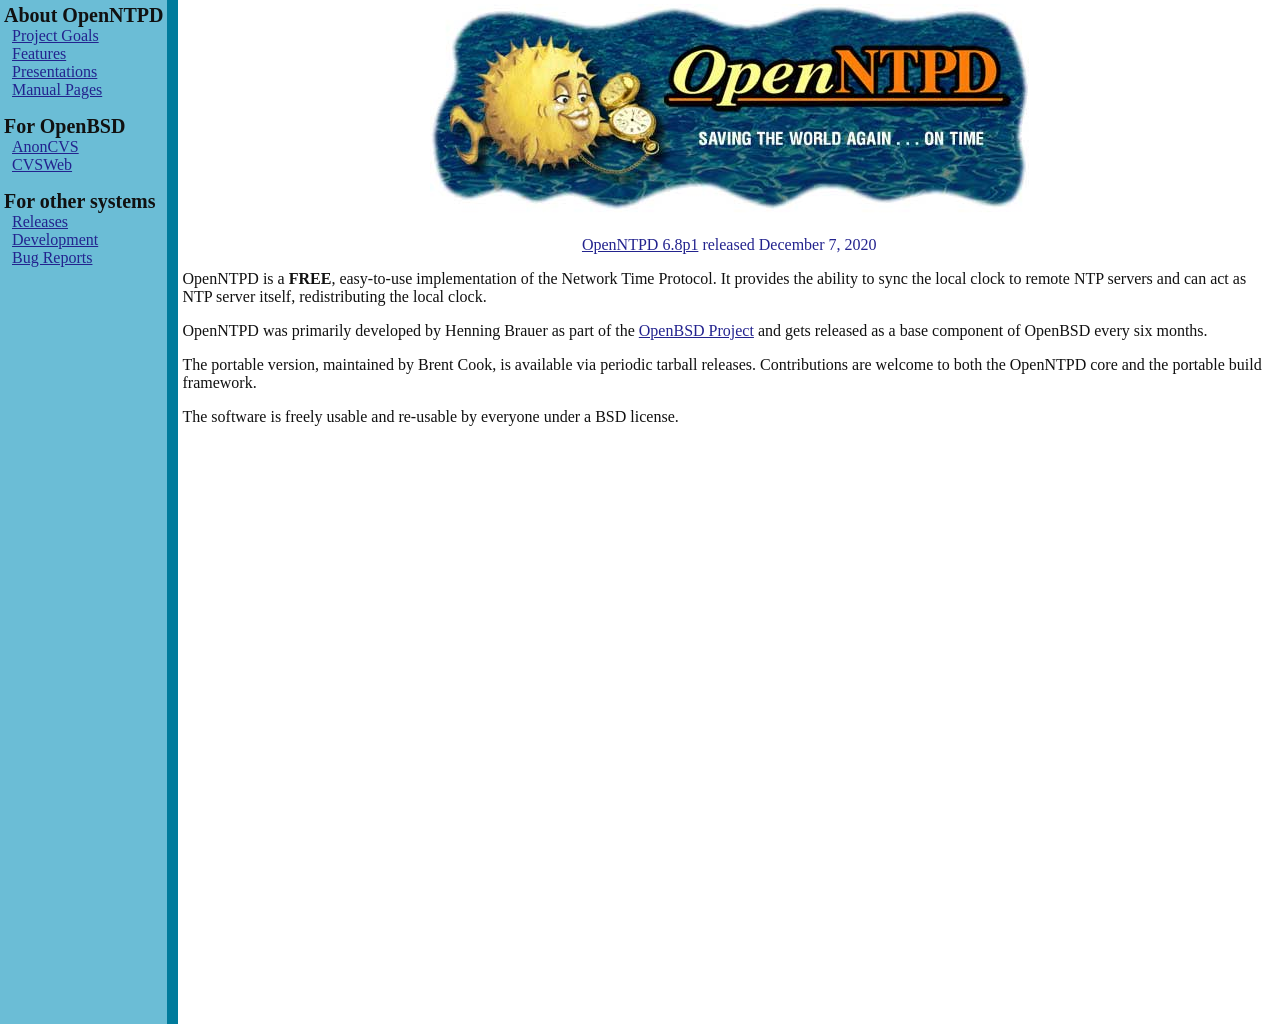 openntpd.org